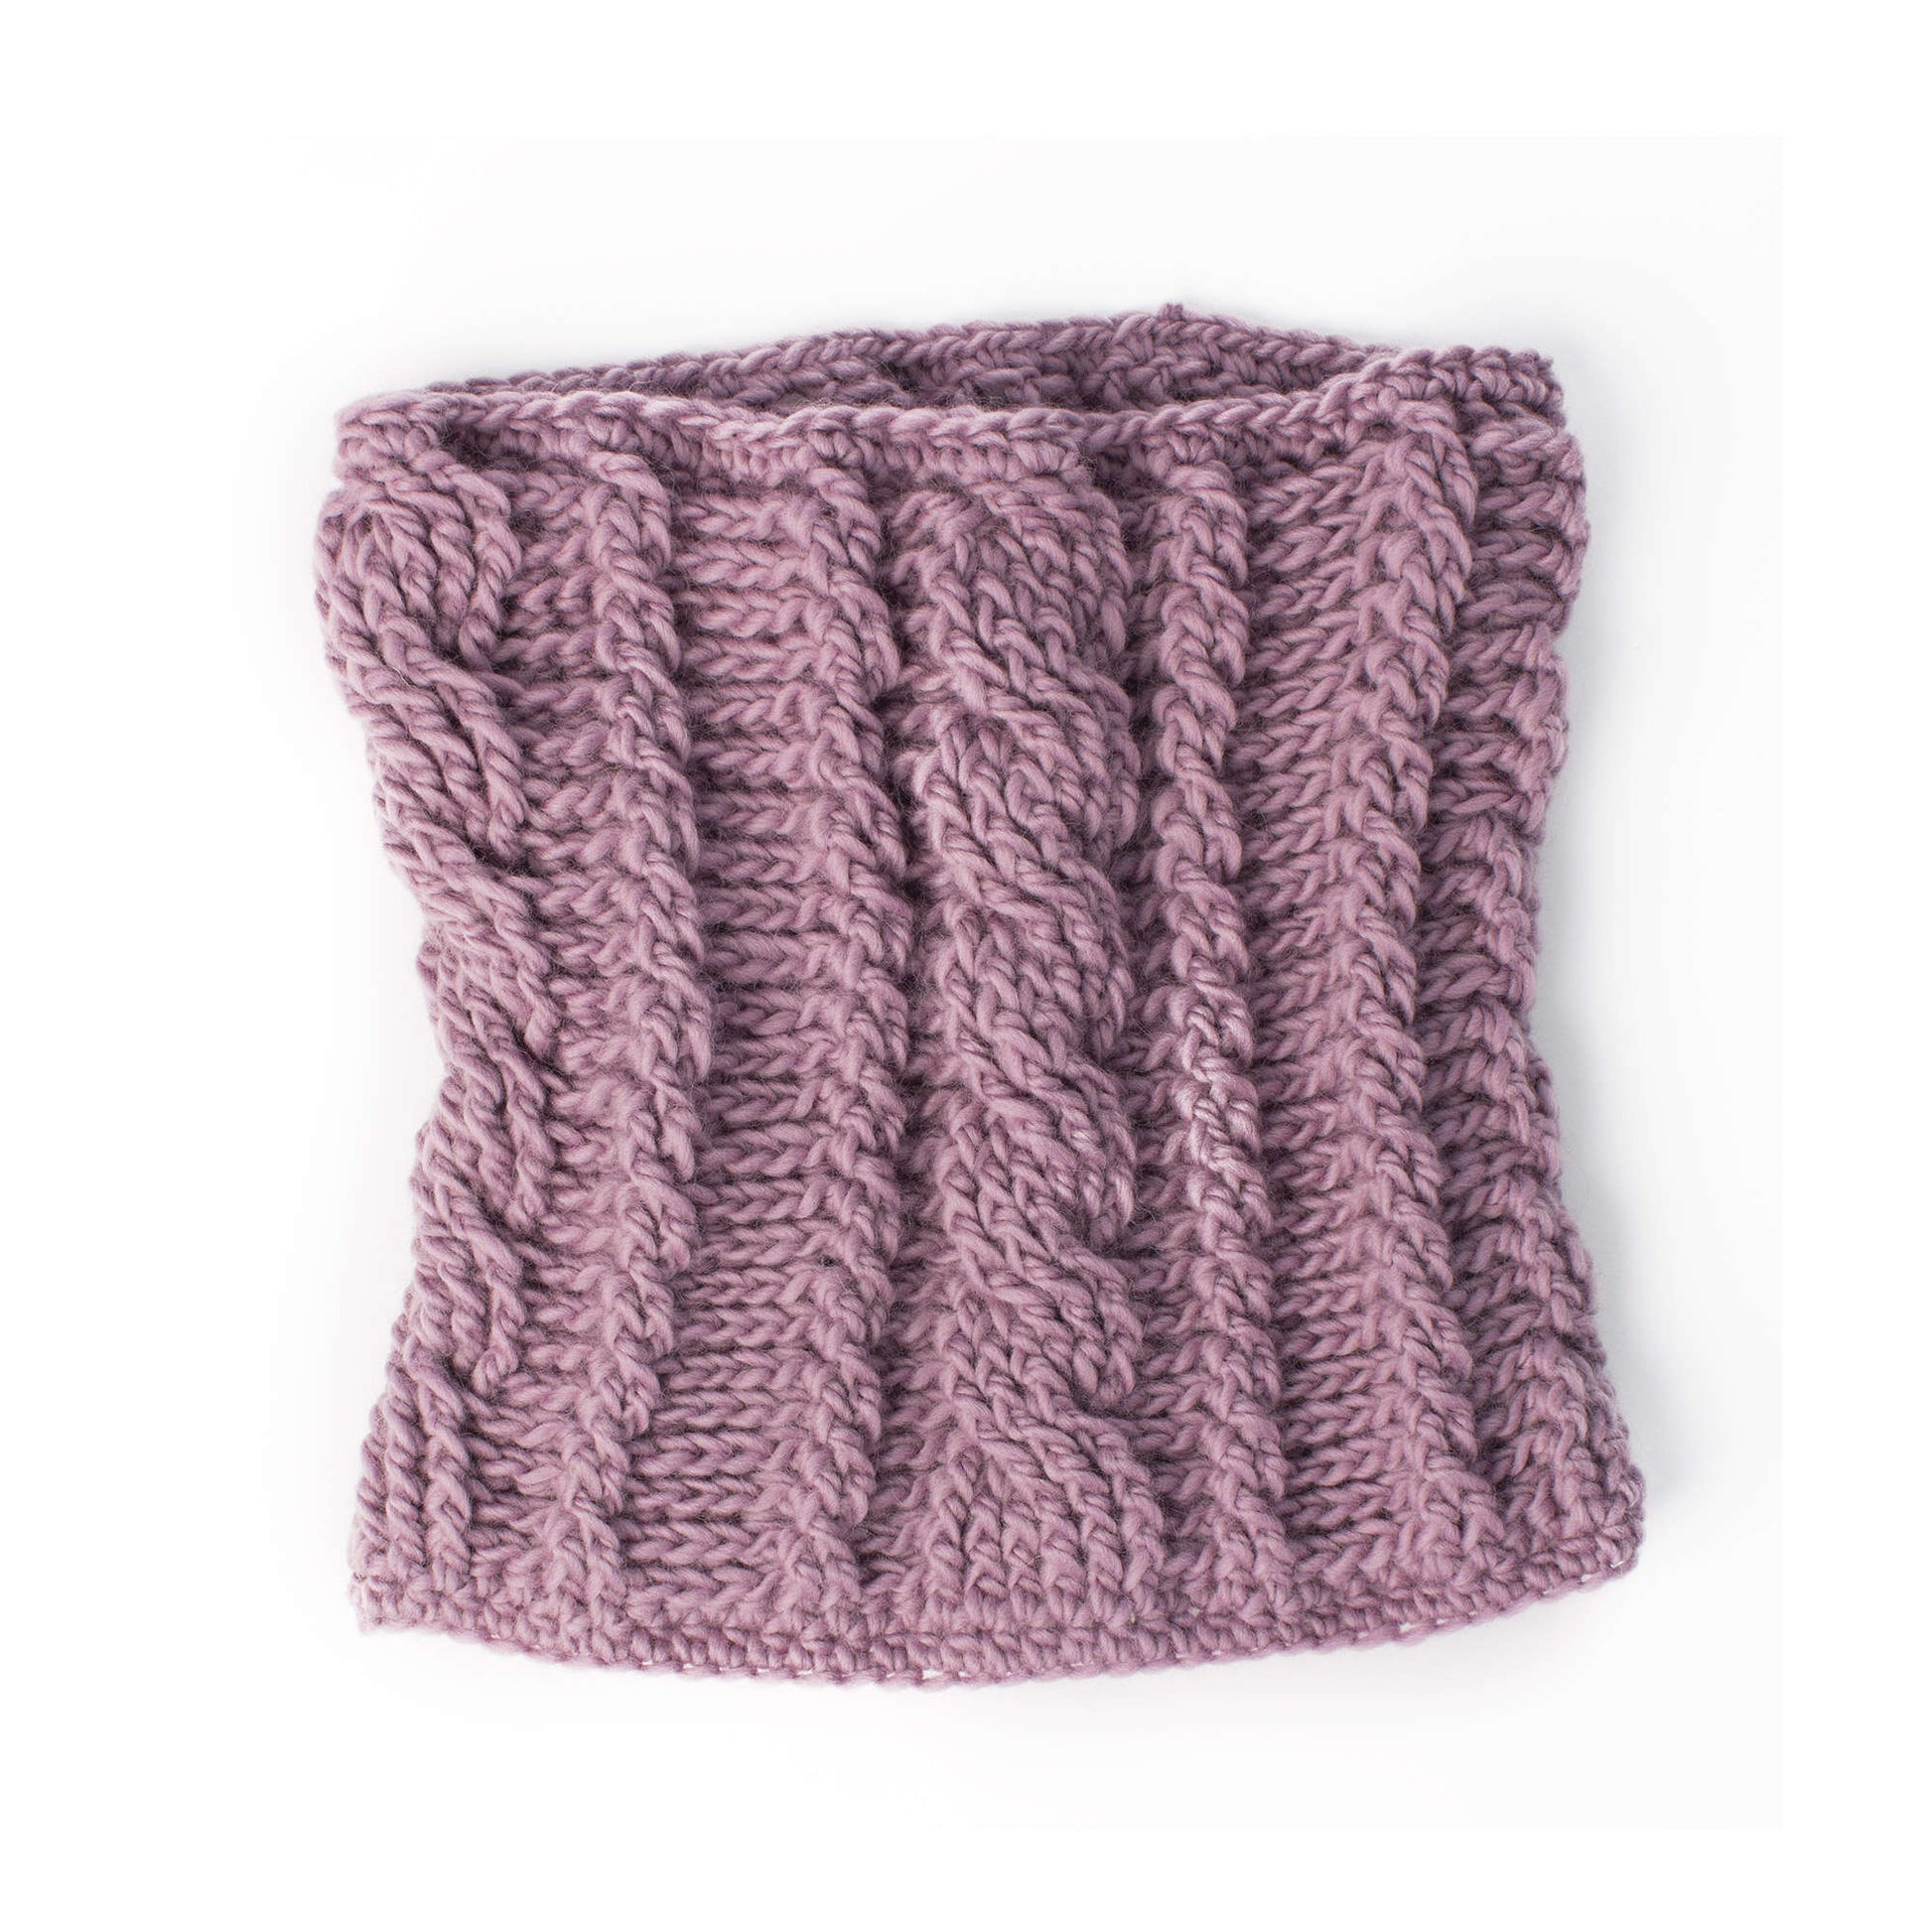 Free Patons Climbing Cables Crochet Cowl Pattern